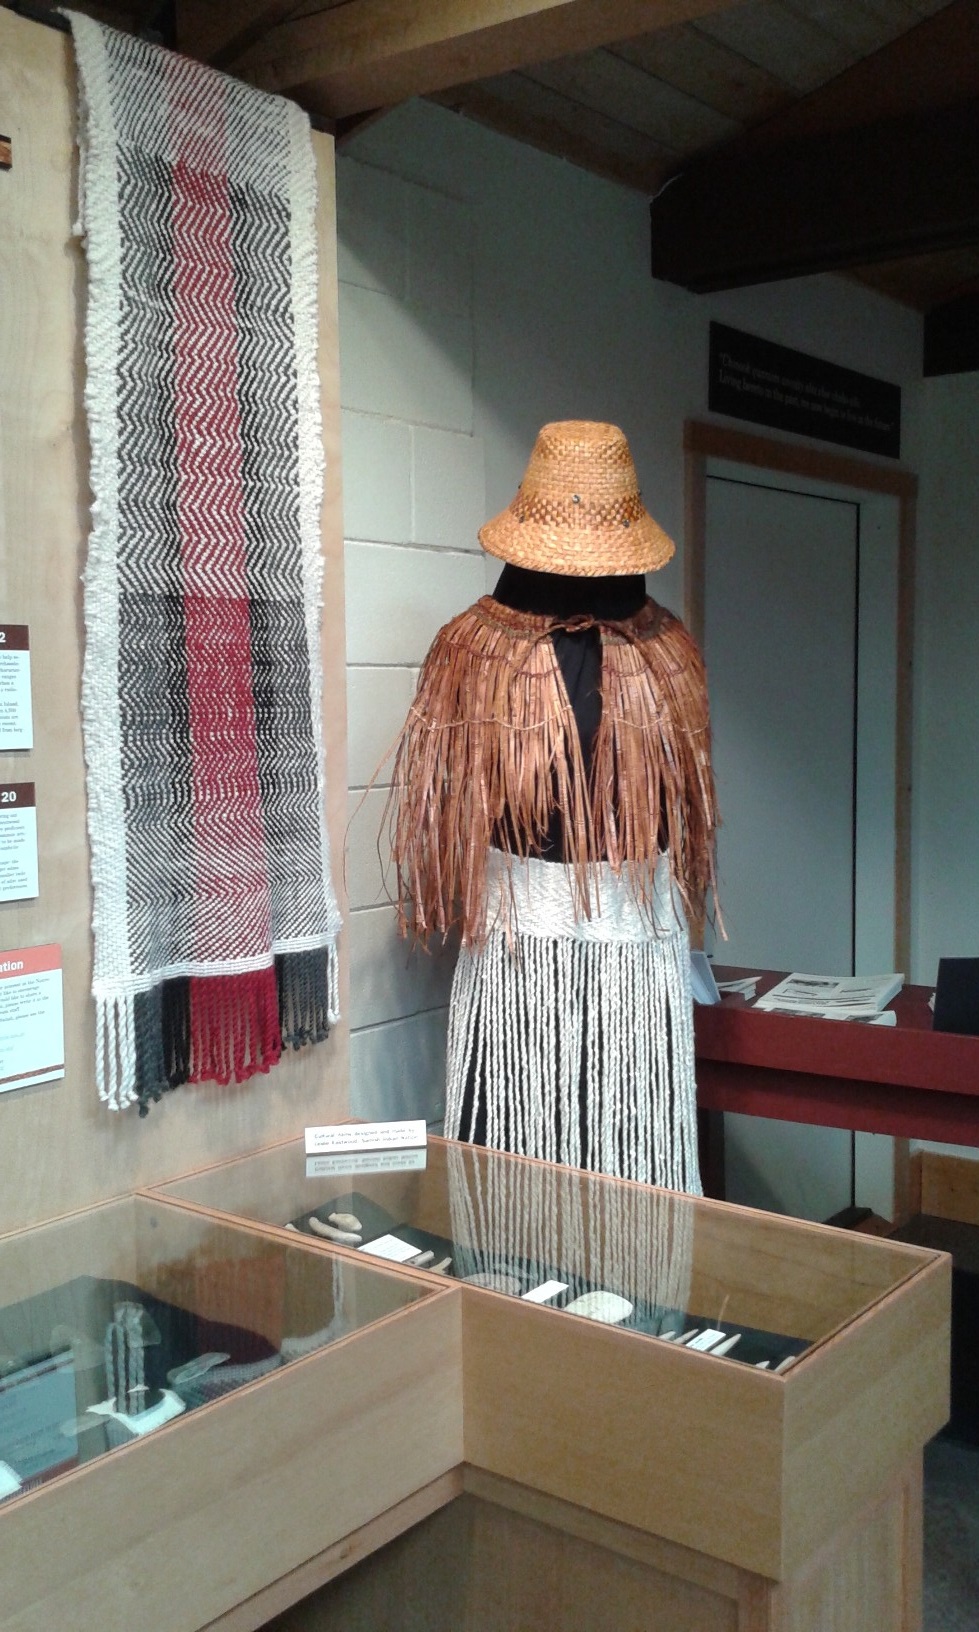 Lopez Island display, hat by Sally Barrett, shawl by Leslie Eastwood, skirt by Michelle Johnson